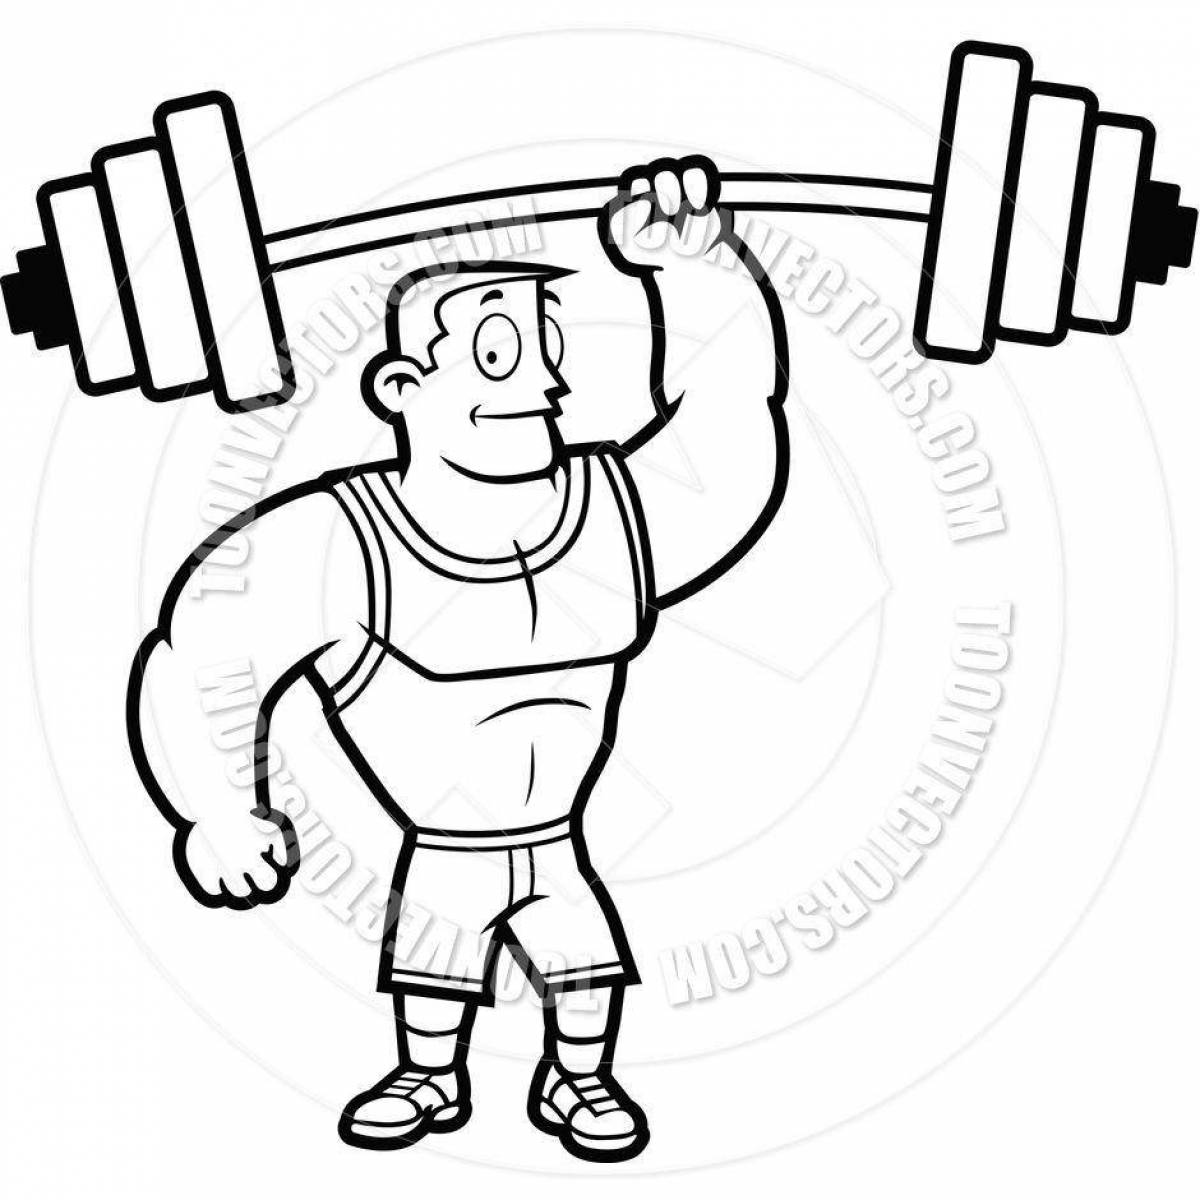 Coloring book determined weightlifter